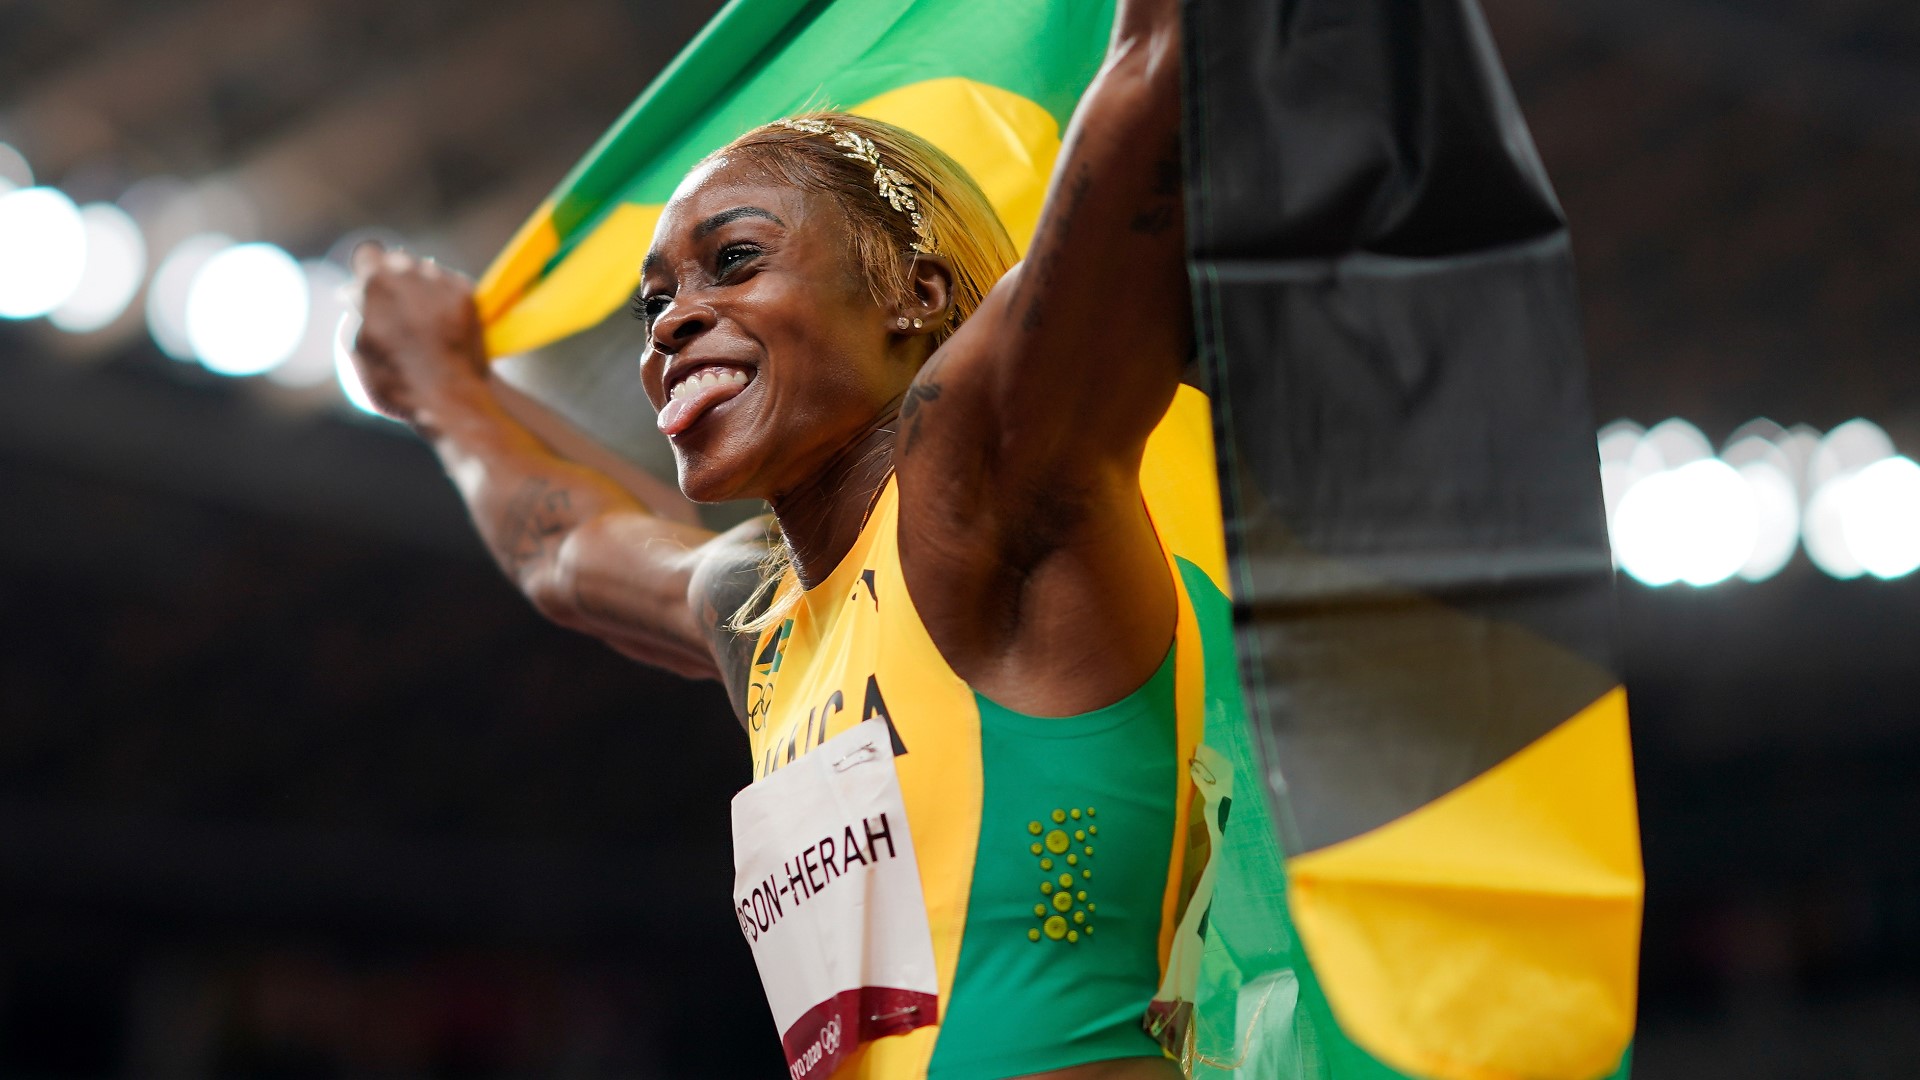 Jamaica's Elaine Thompson-Herah broke a longstanding Olympic record on Saturday in the women's 100 meter race